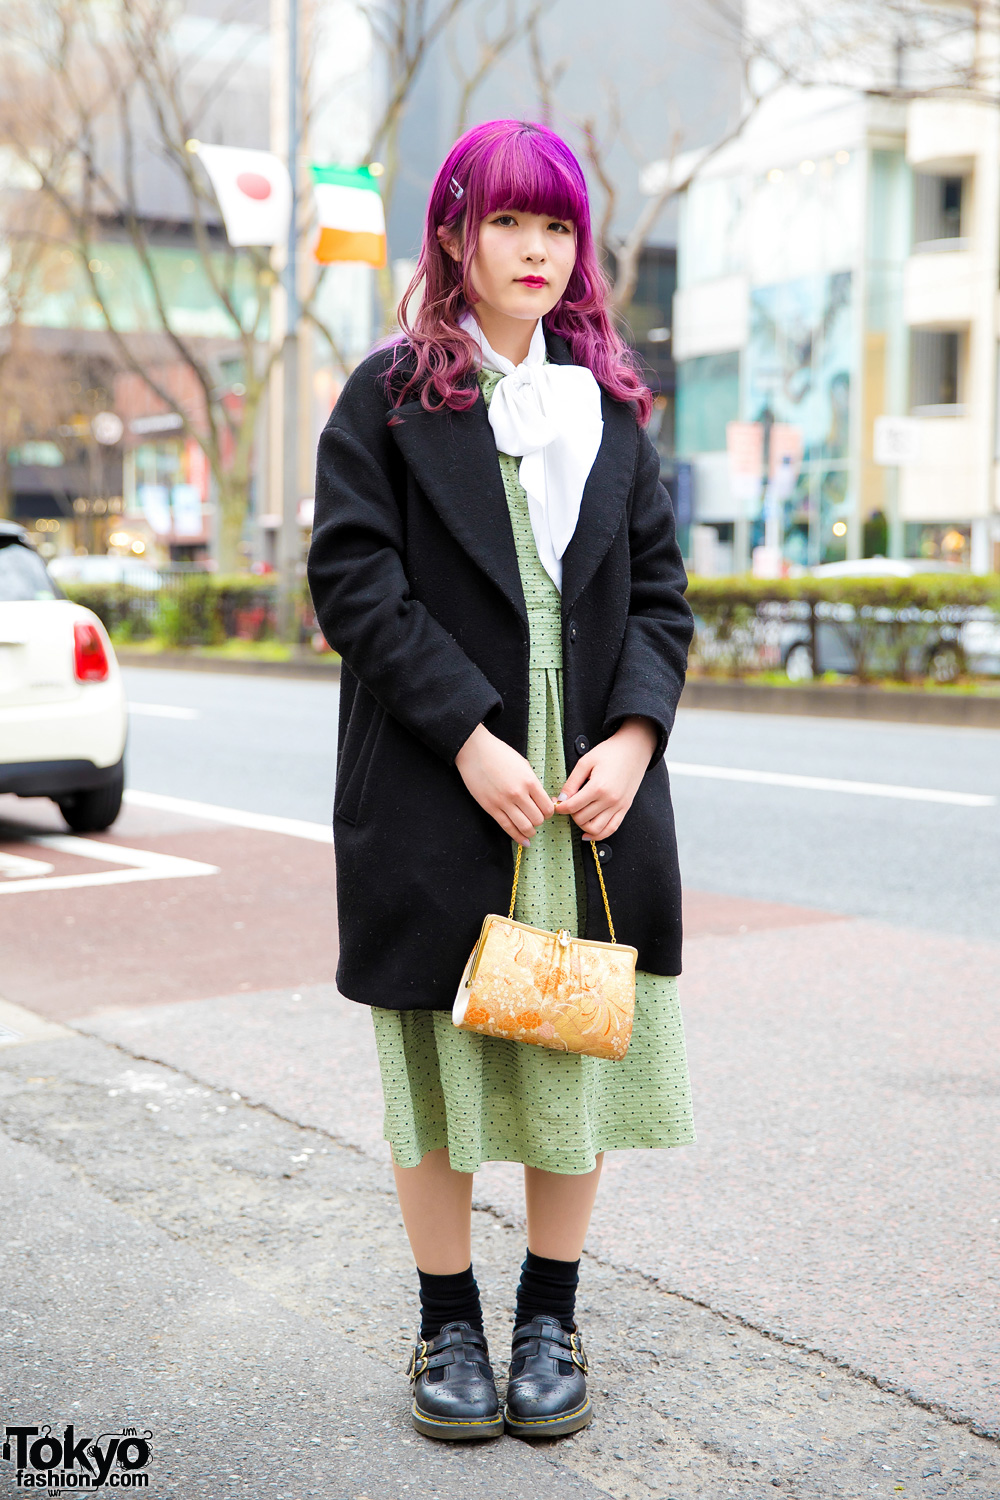 Purple-Haired Harajuku Girl in Chic Retro Vintage Style w/ Dr. Martens Mary Jane Shoes & Floral Print Chain Bag